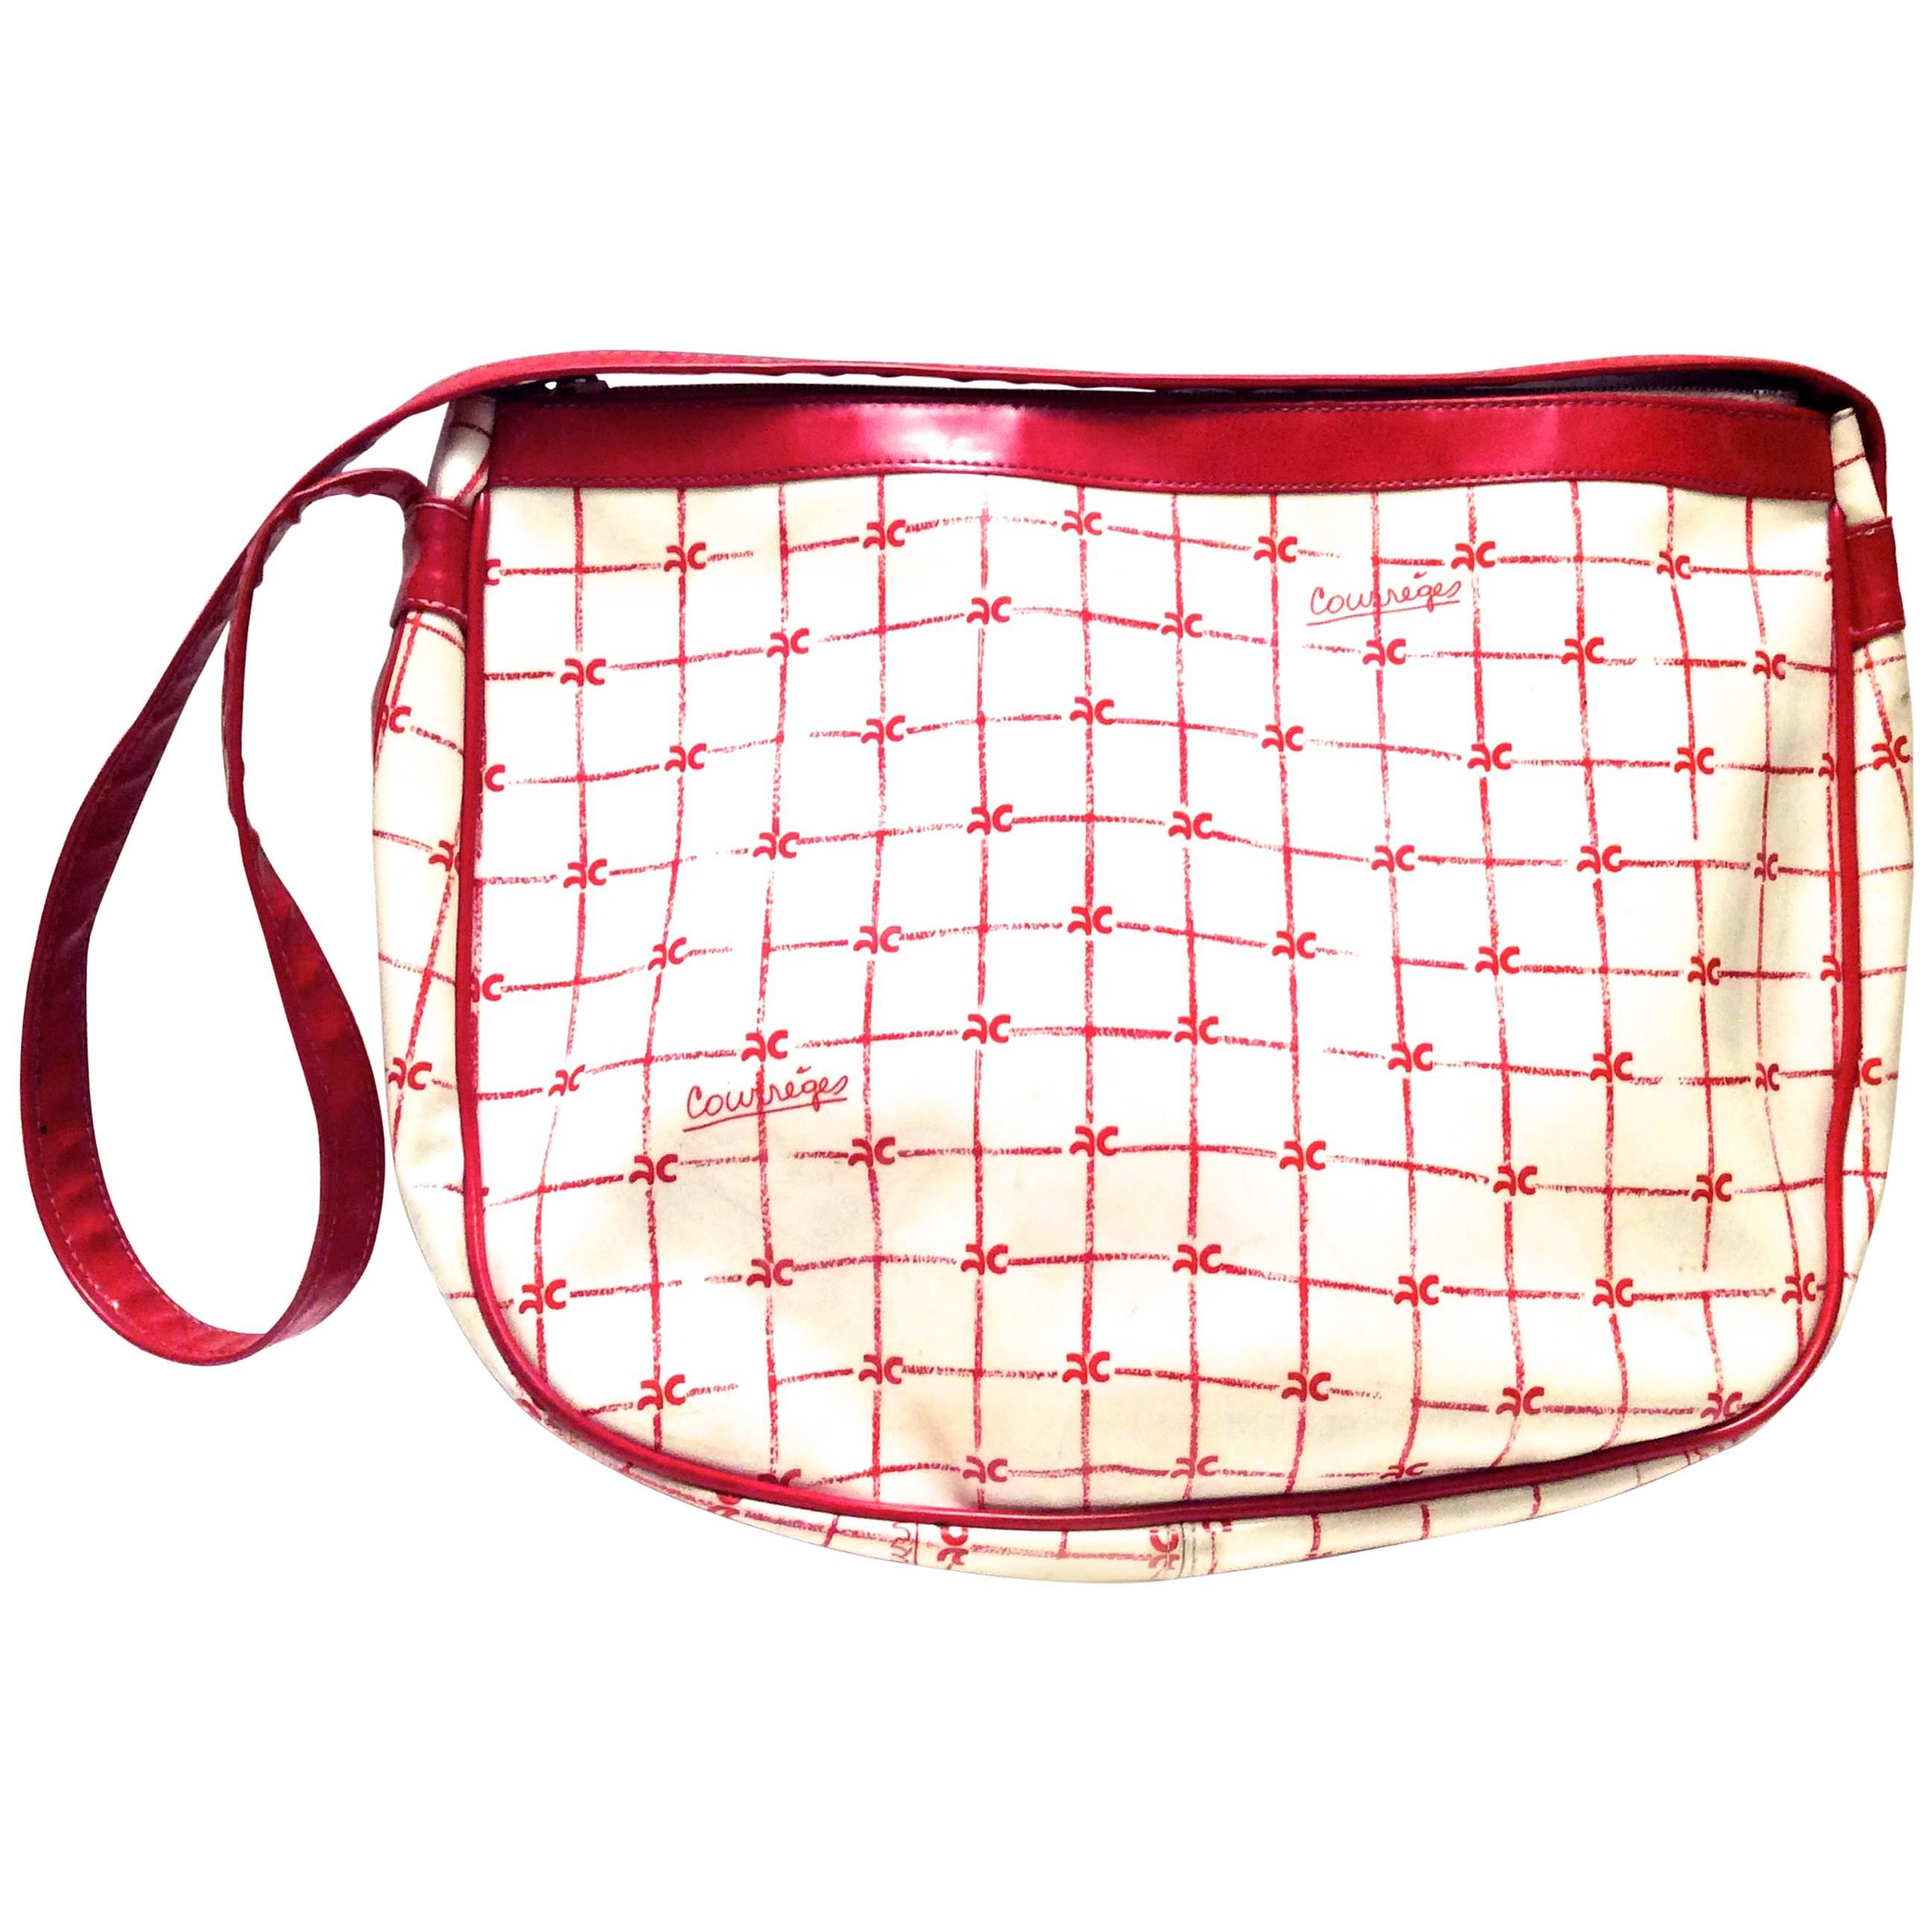 Rare 1970's Courreges Purse - White and Red  For Sale